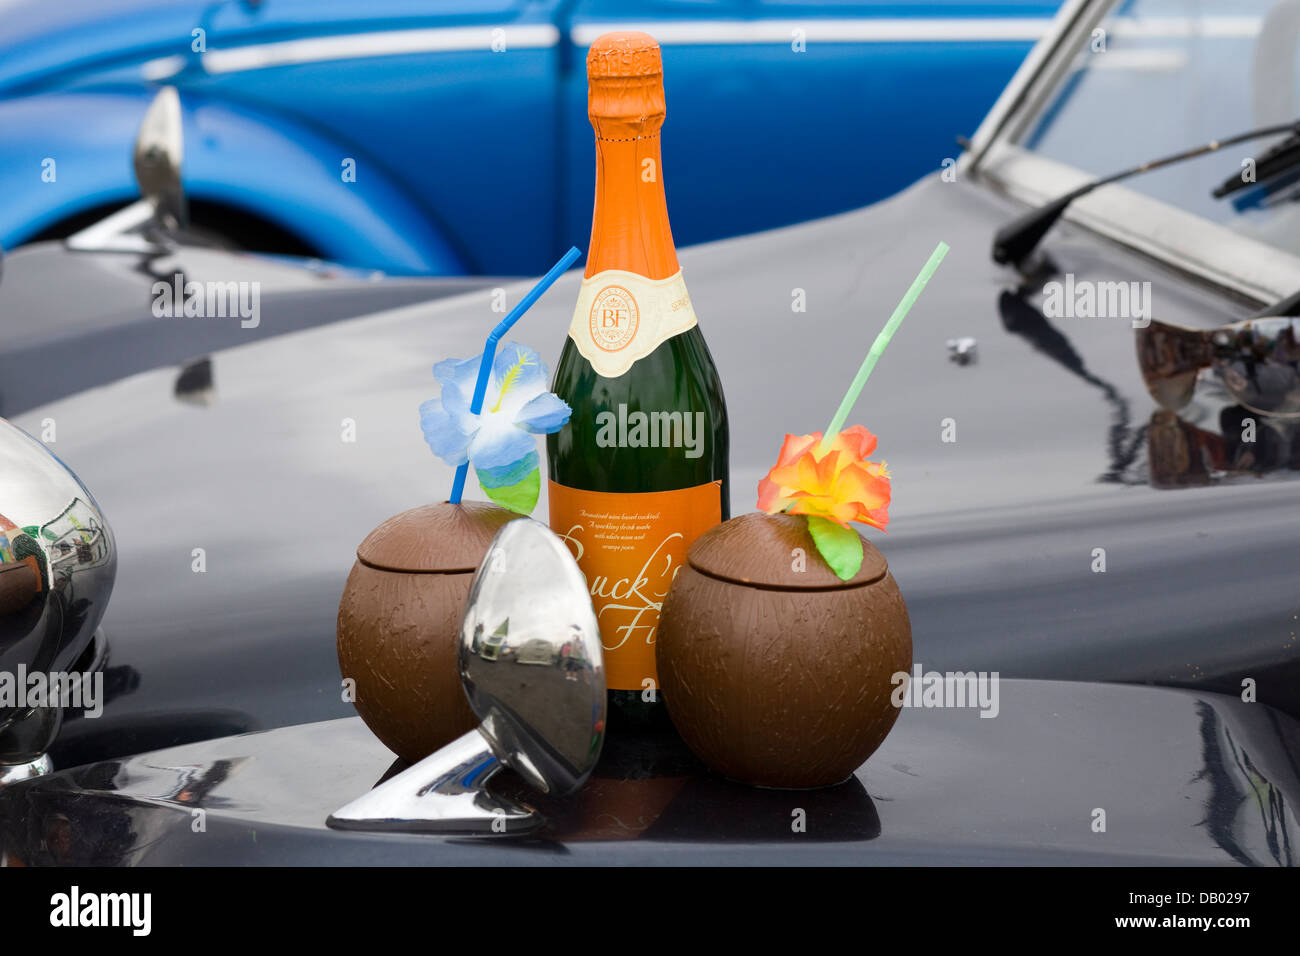 Bottle of Bucks Fizz with plastic Coconut shells and flowers on bonnet of a VW Beetle Stock Photo